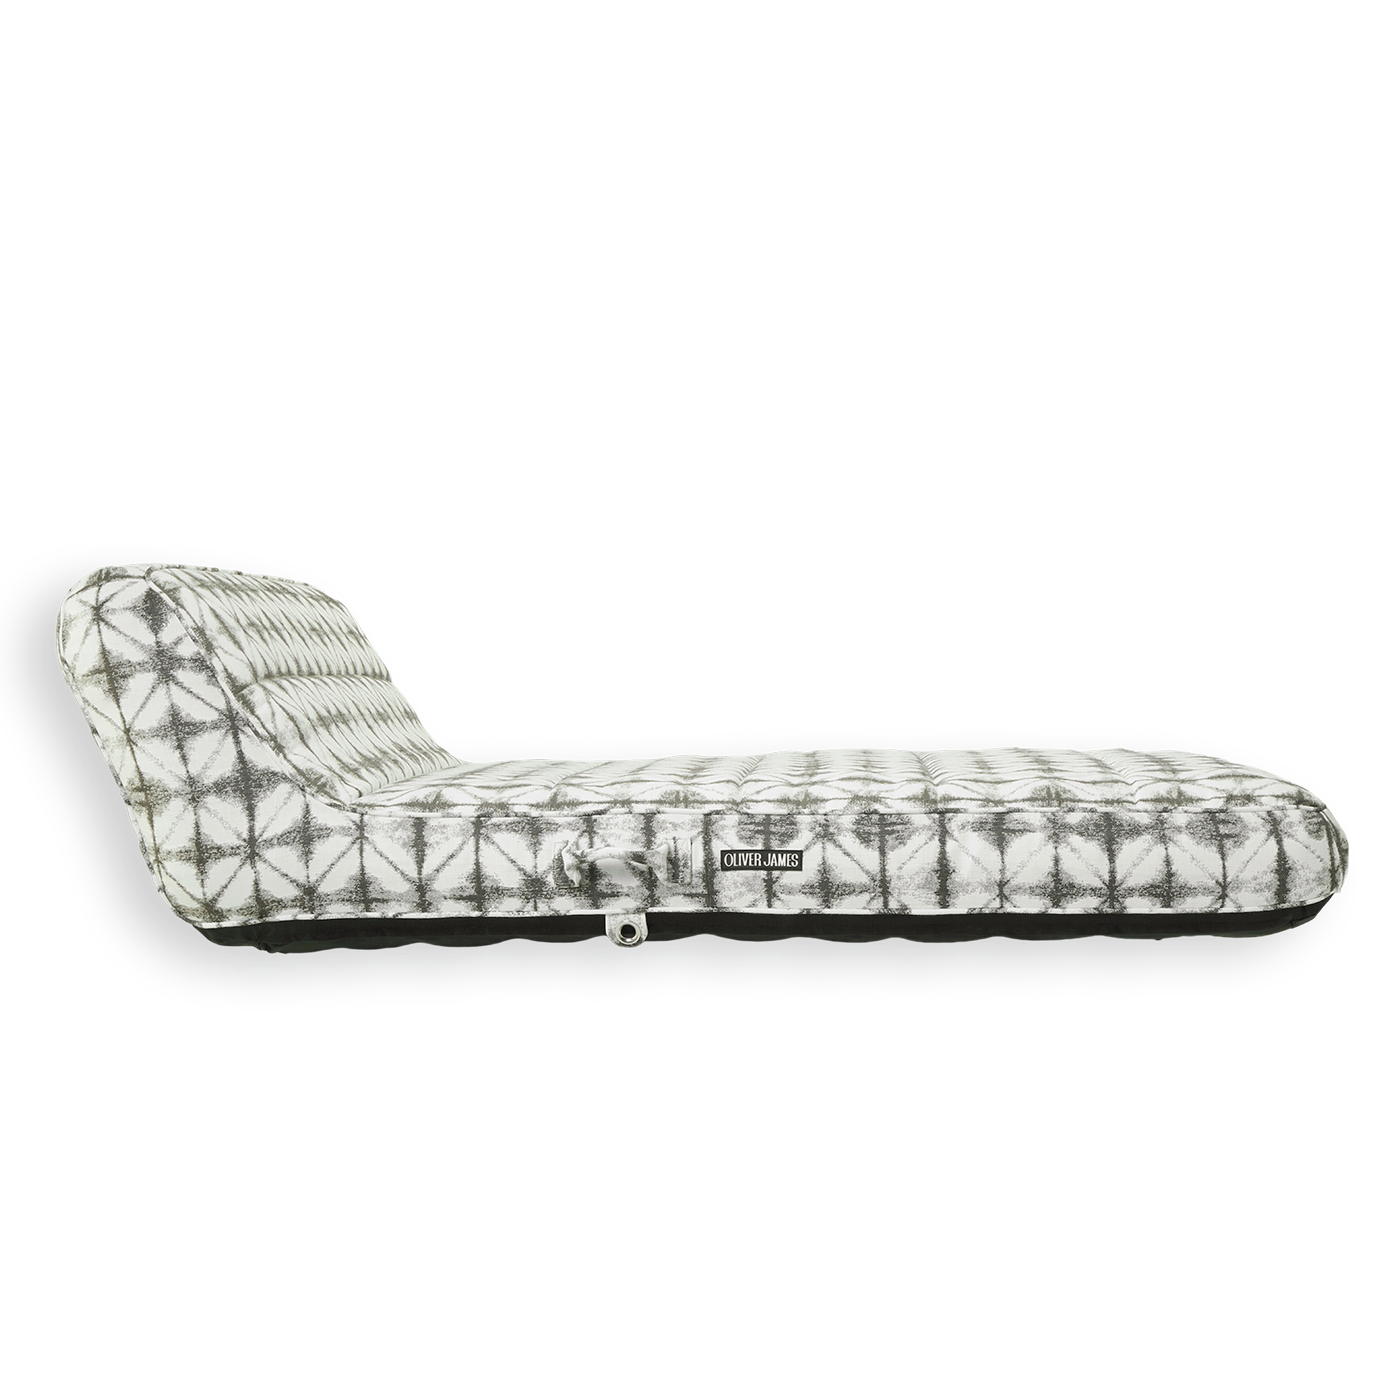 The side profile and backrest angle of a double white and grey luxury pool float.